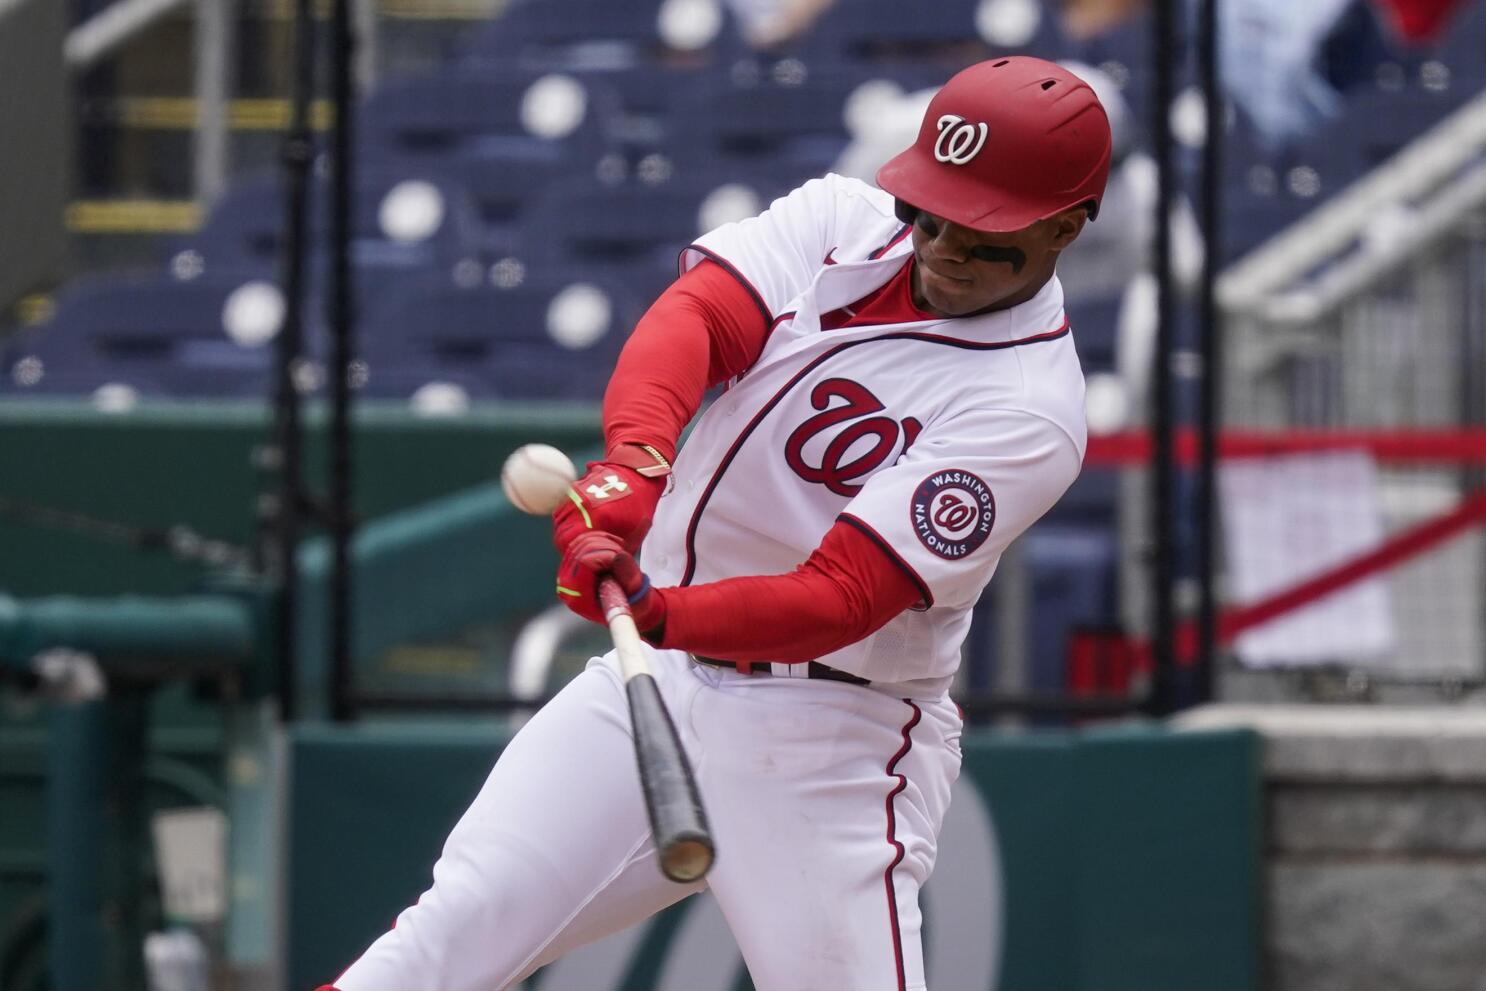 Will Juan Soto be in right field for the Washington Nationals in